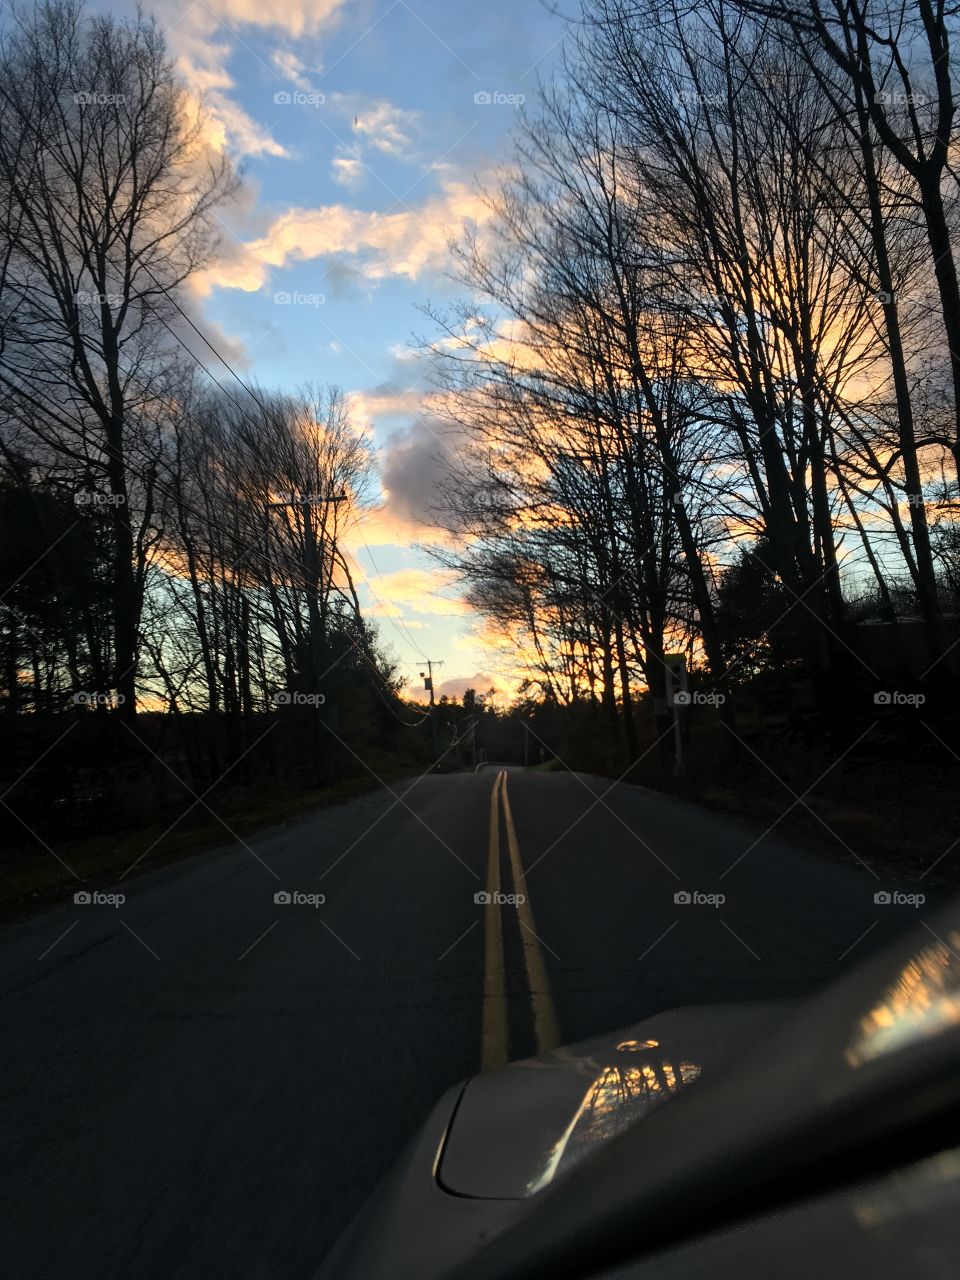 Long open road ahead with beautiful sunset. Wonder what adventures await me and can’t wait!